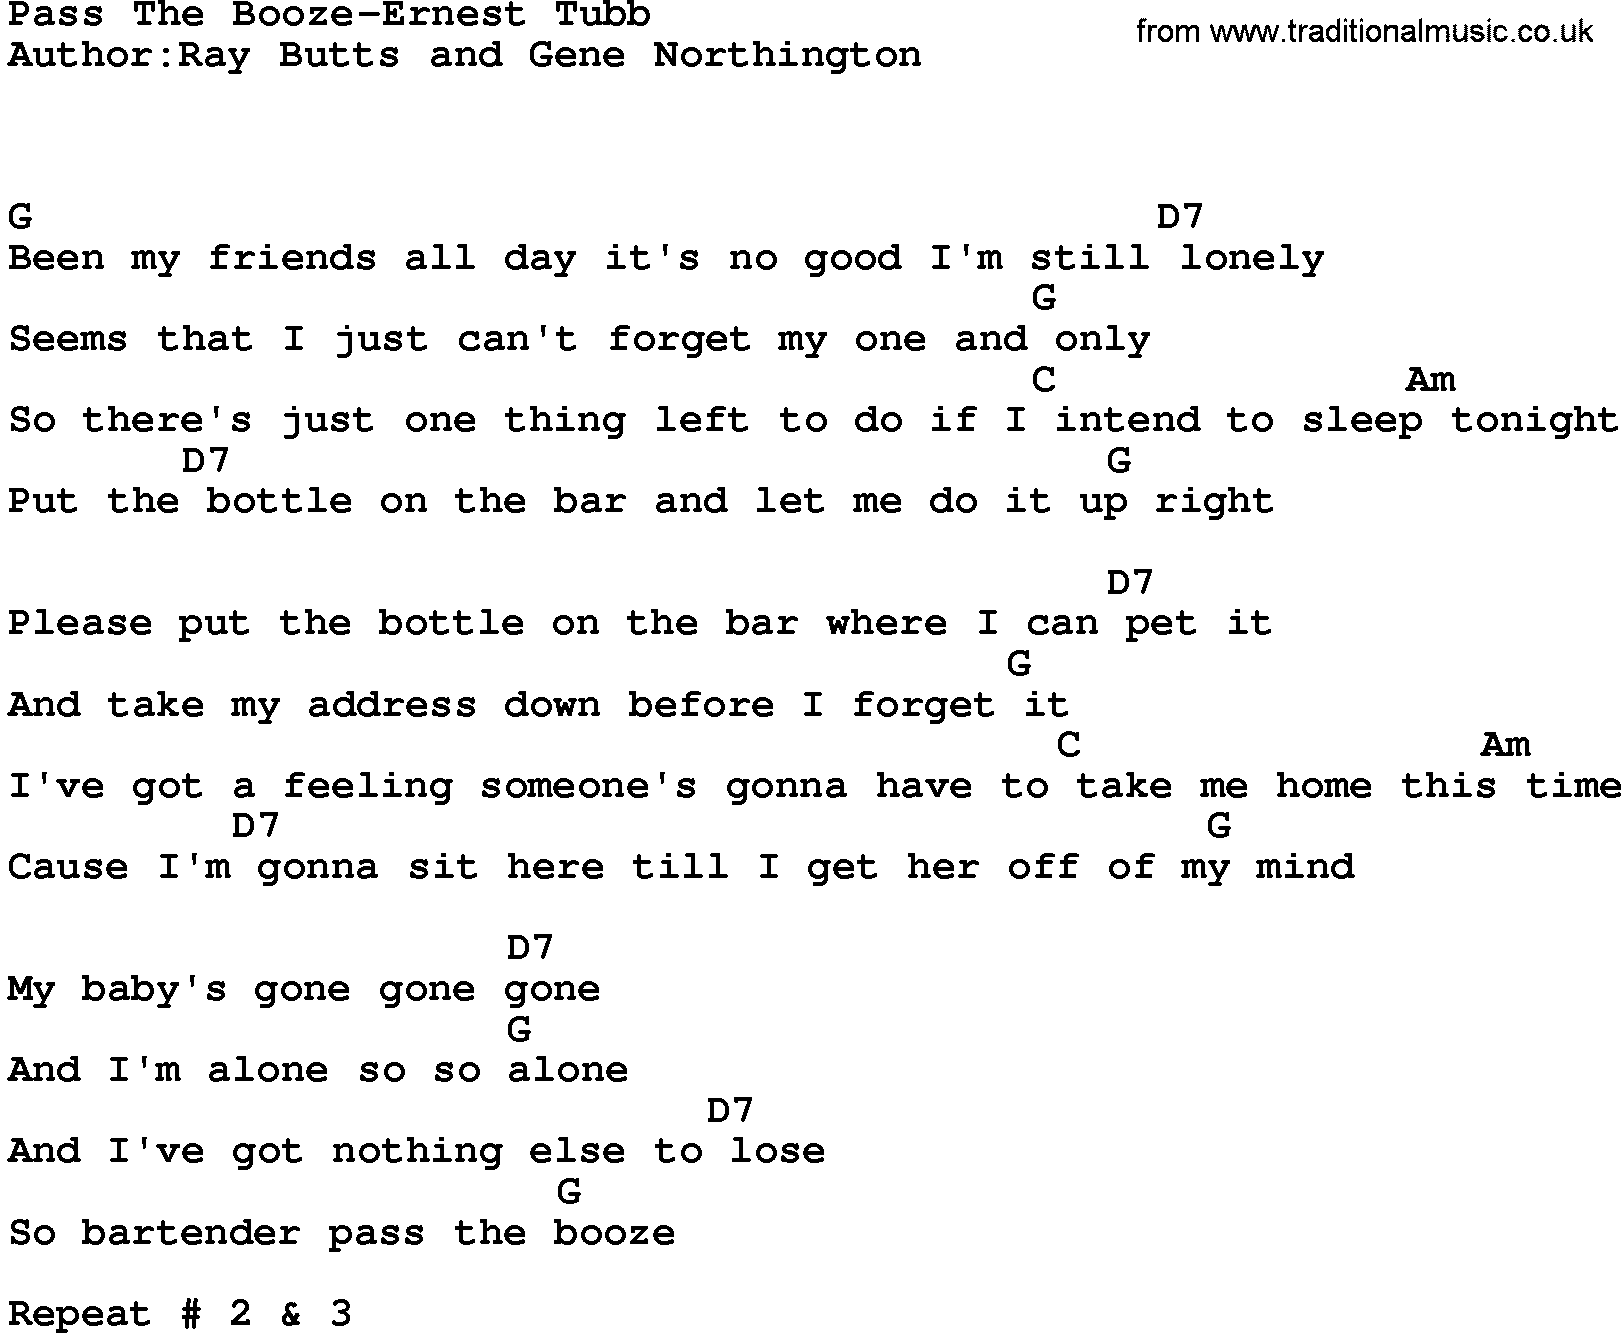 Country music song: Pass The Booze-Ernest Tubb lyrics and chords